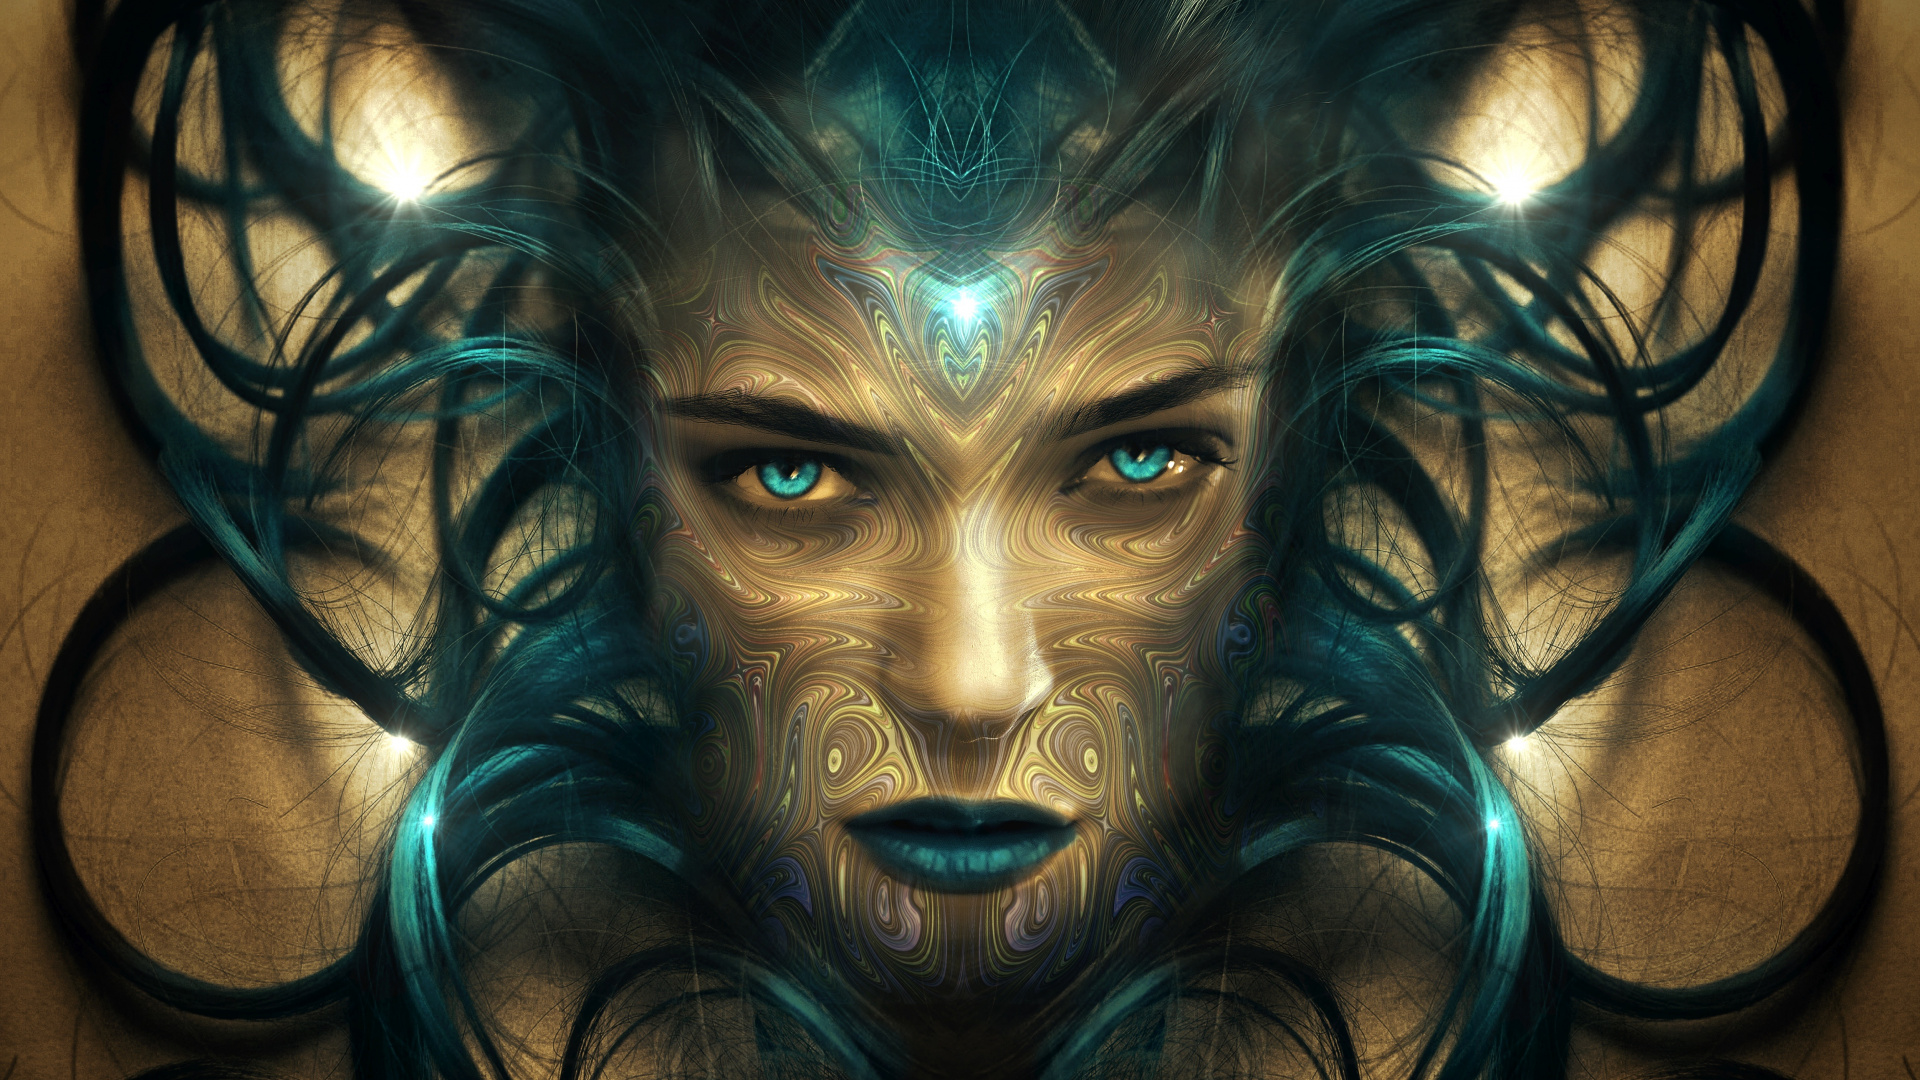 Blue and Black Human Face Painting. Wallpaper in 1920x1080 Resolution